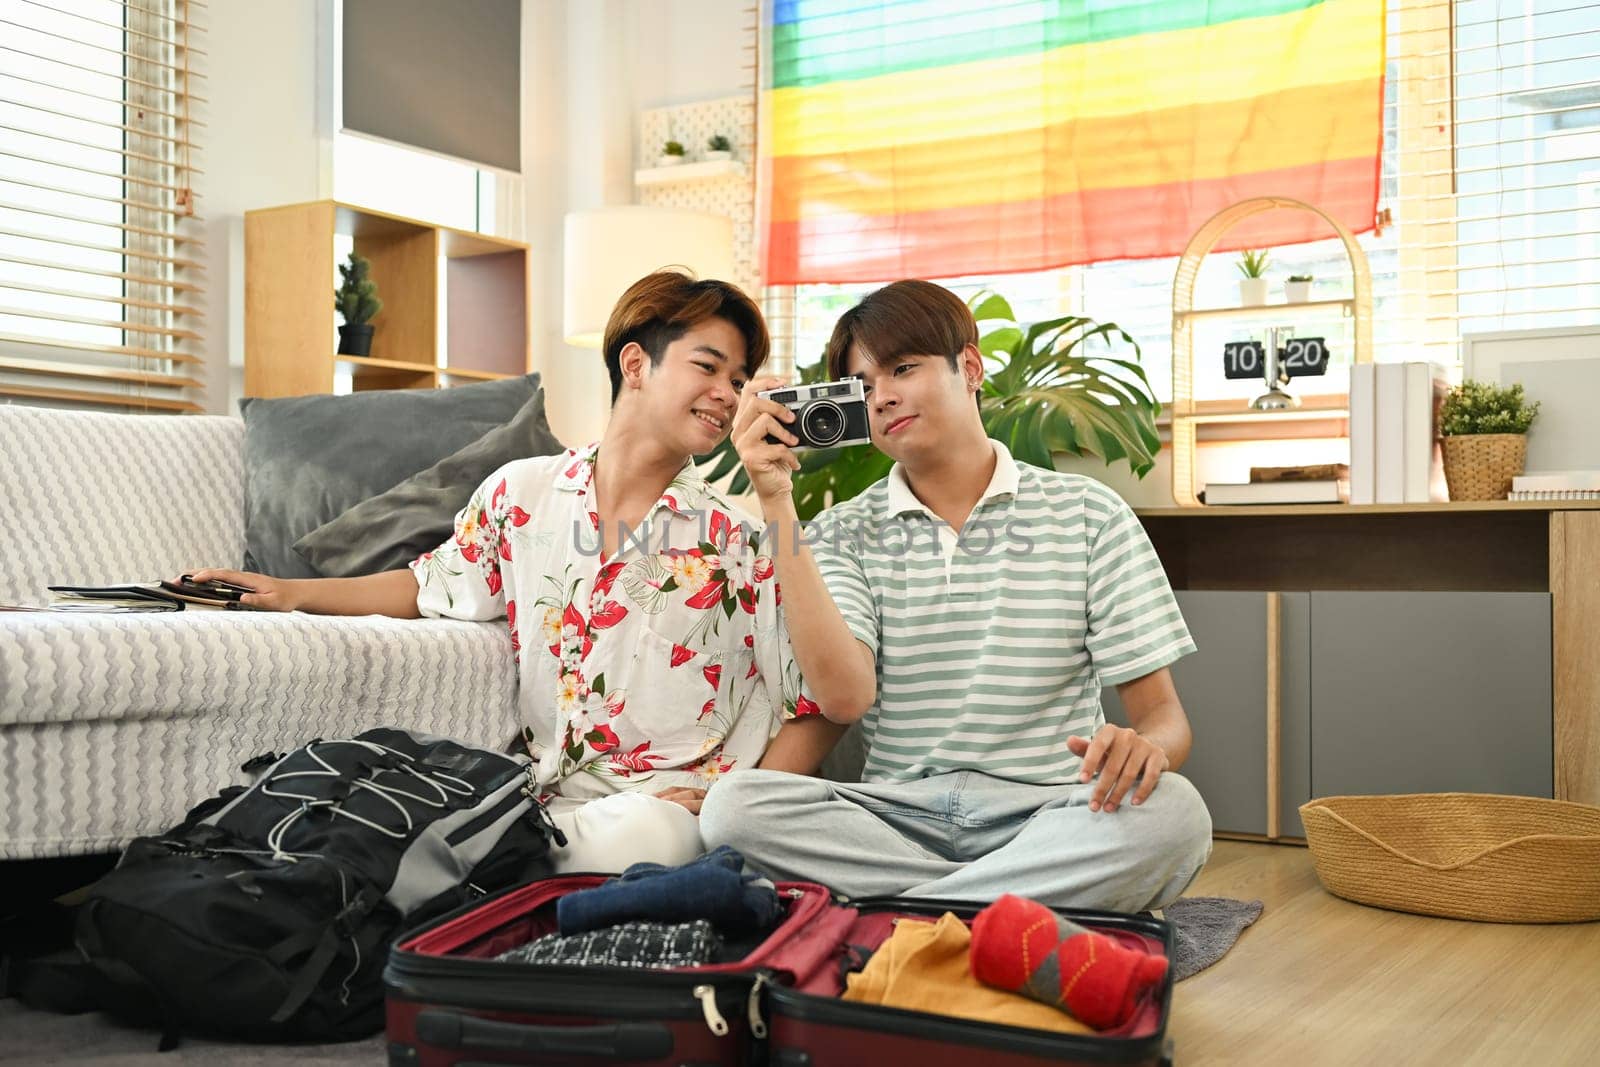 Smiling homosexual couple sitting on floor in living room and packing clothes into travel bag.